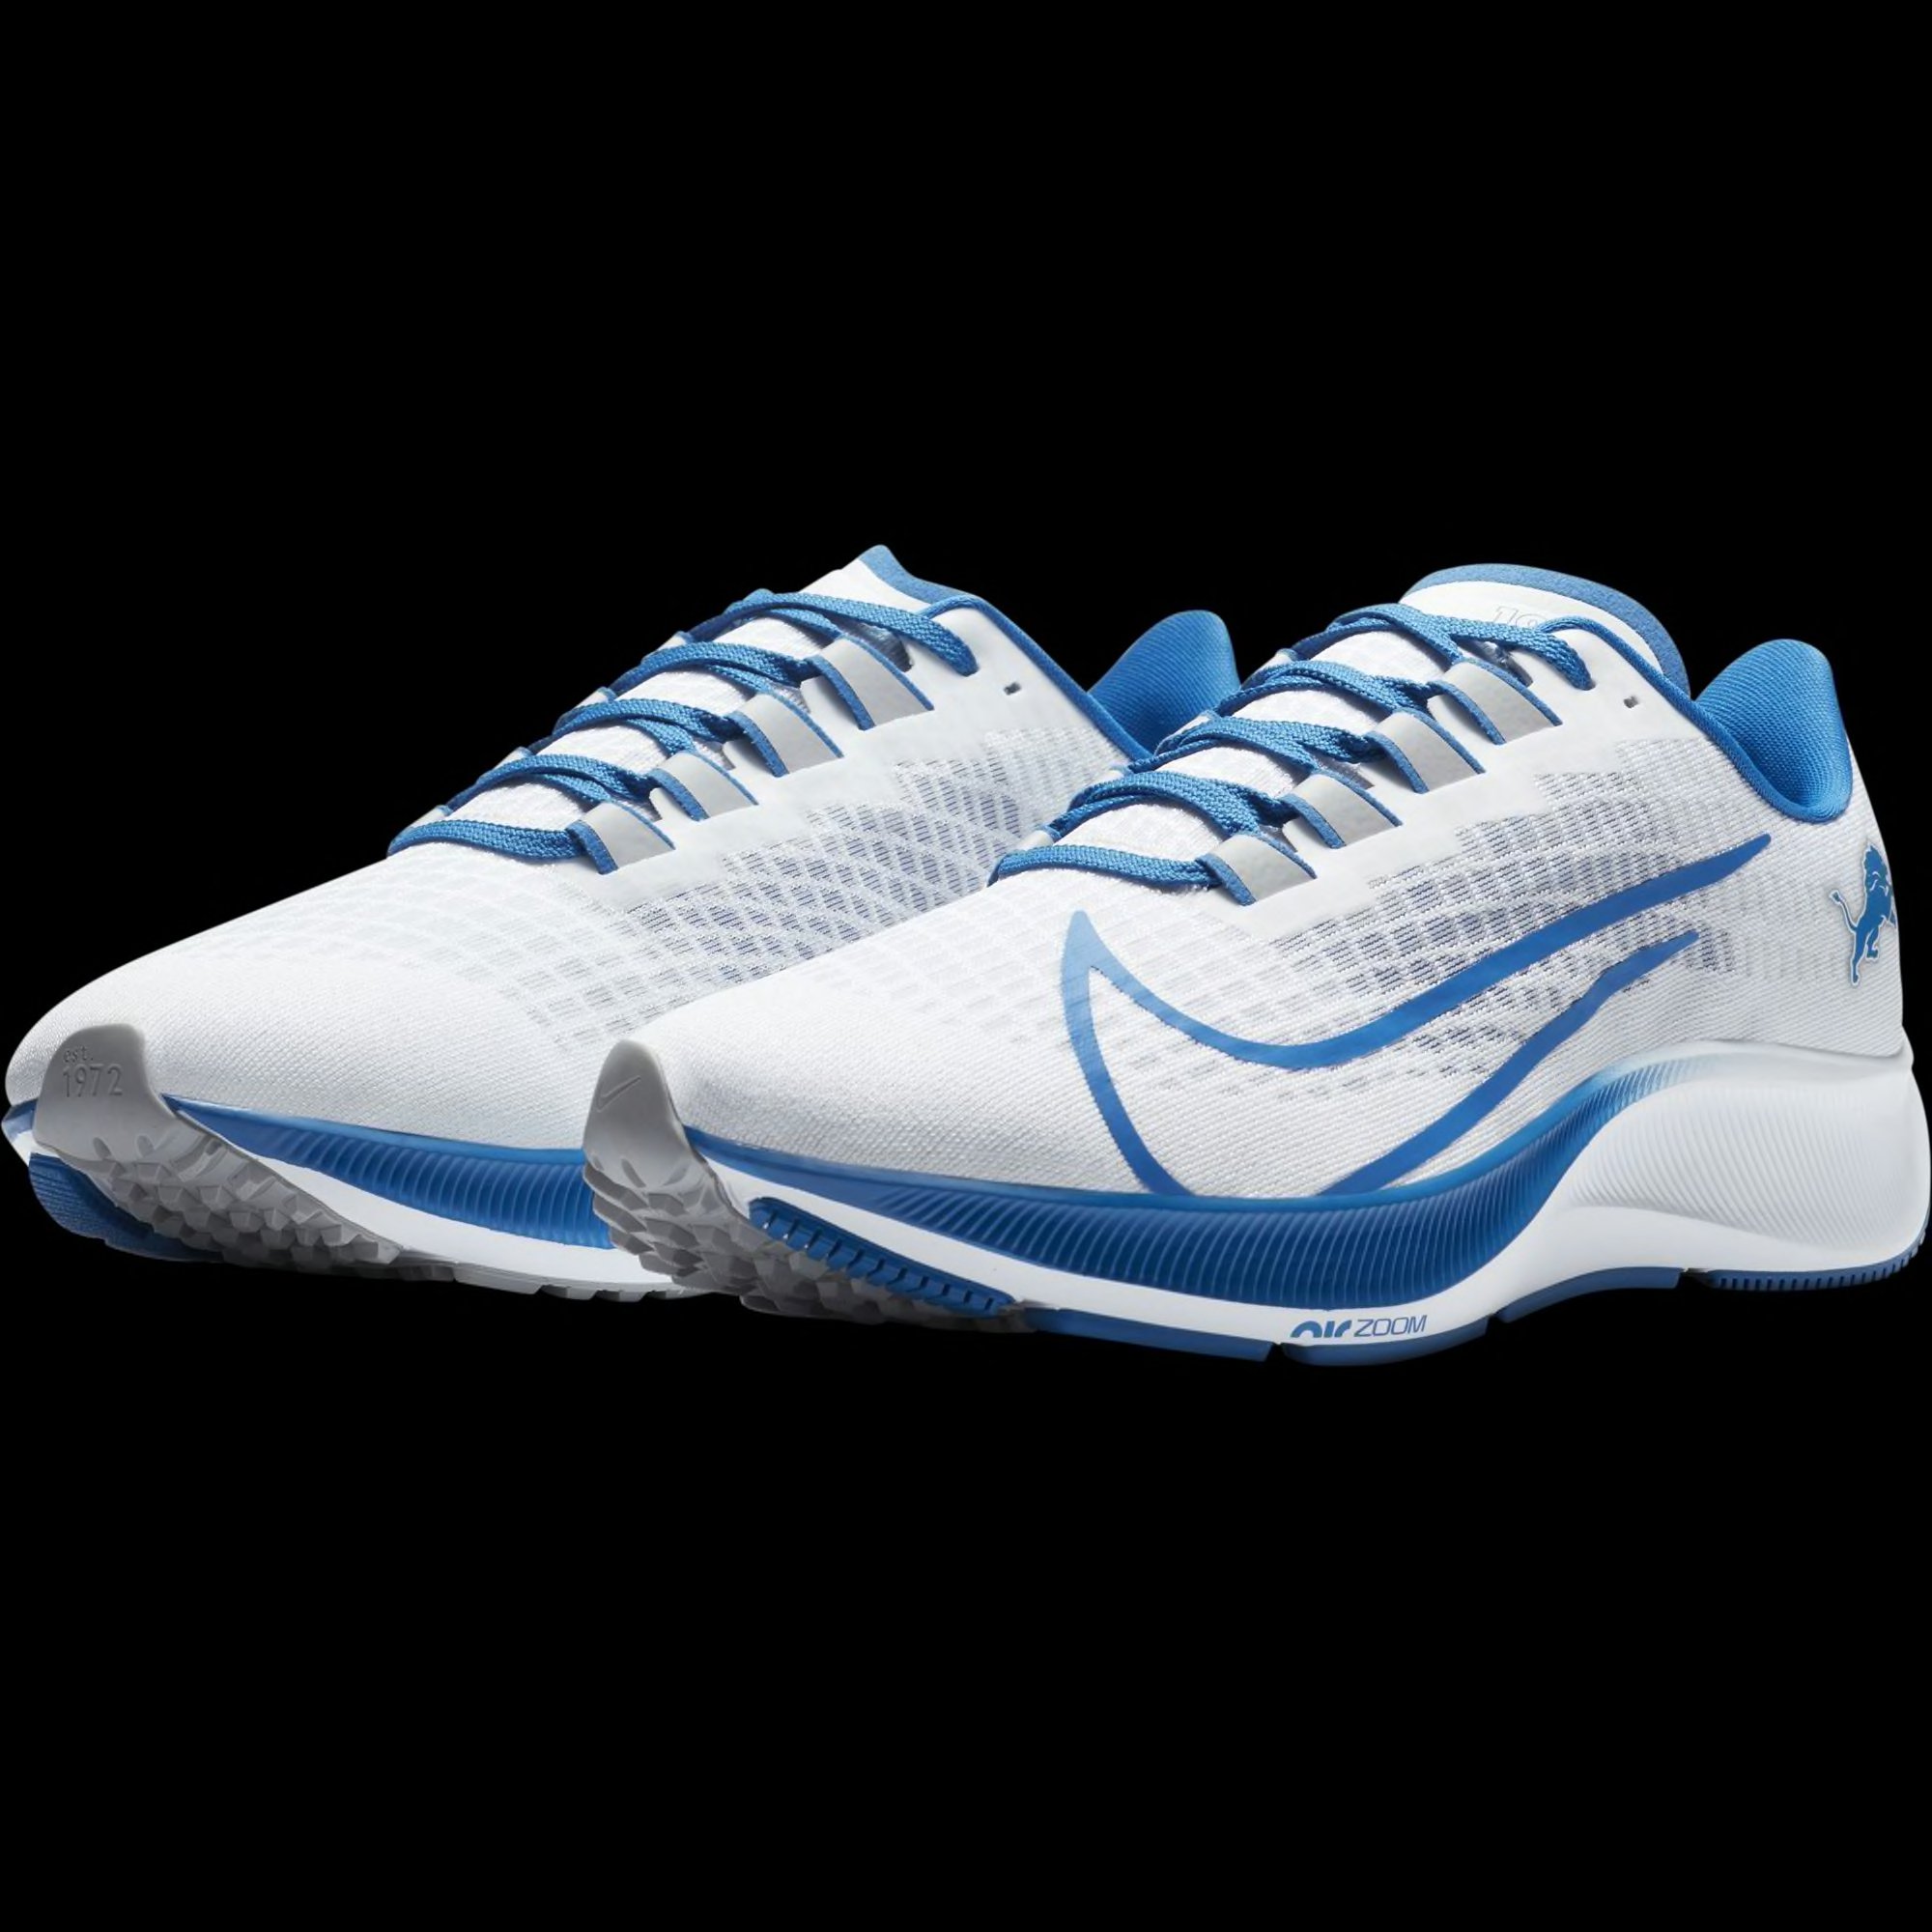 These Detroit Lions Nike running shoes 